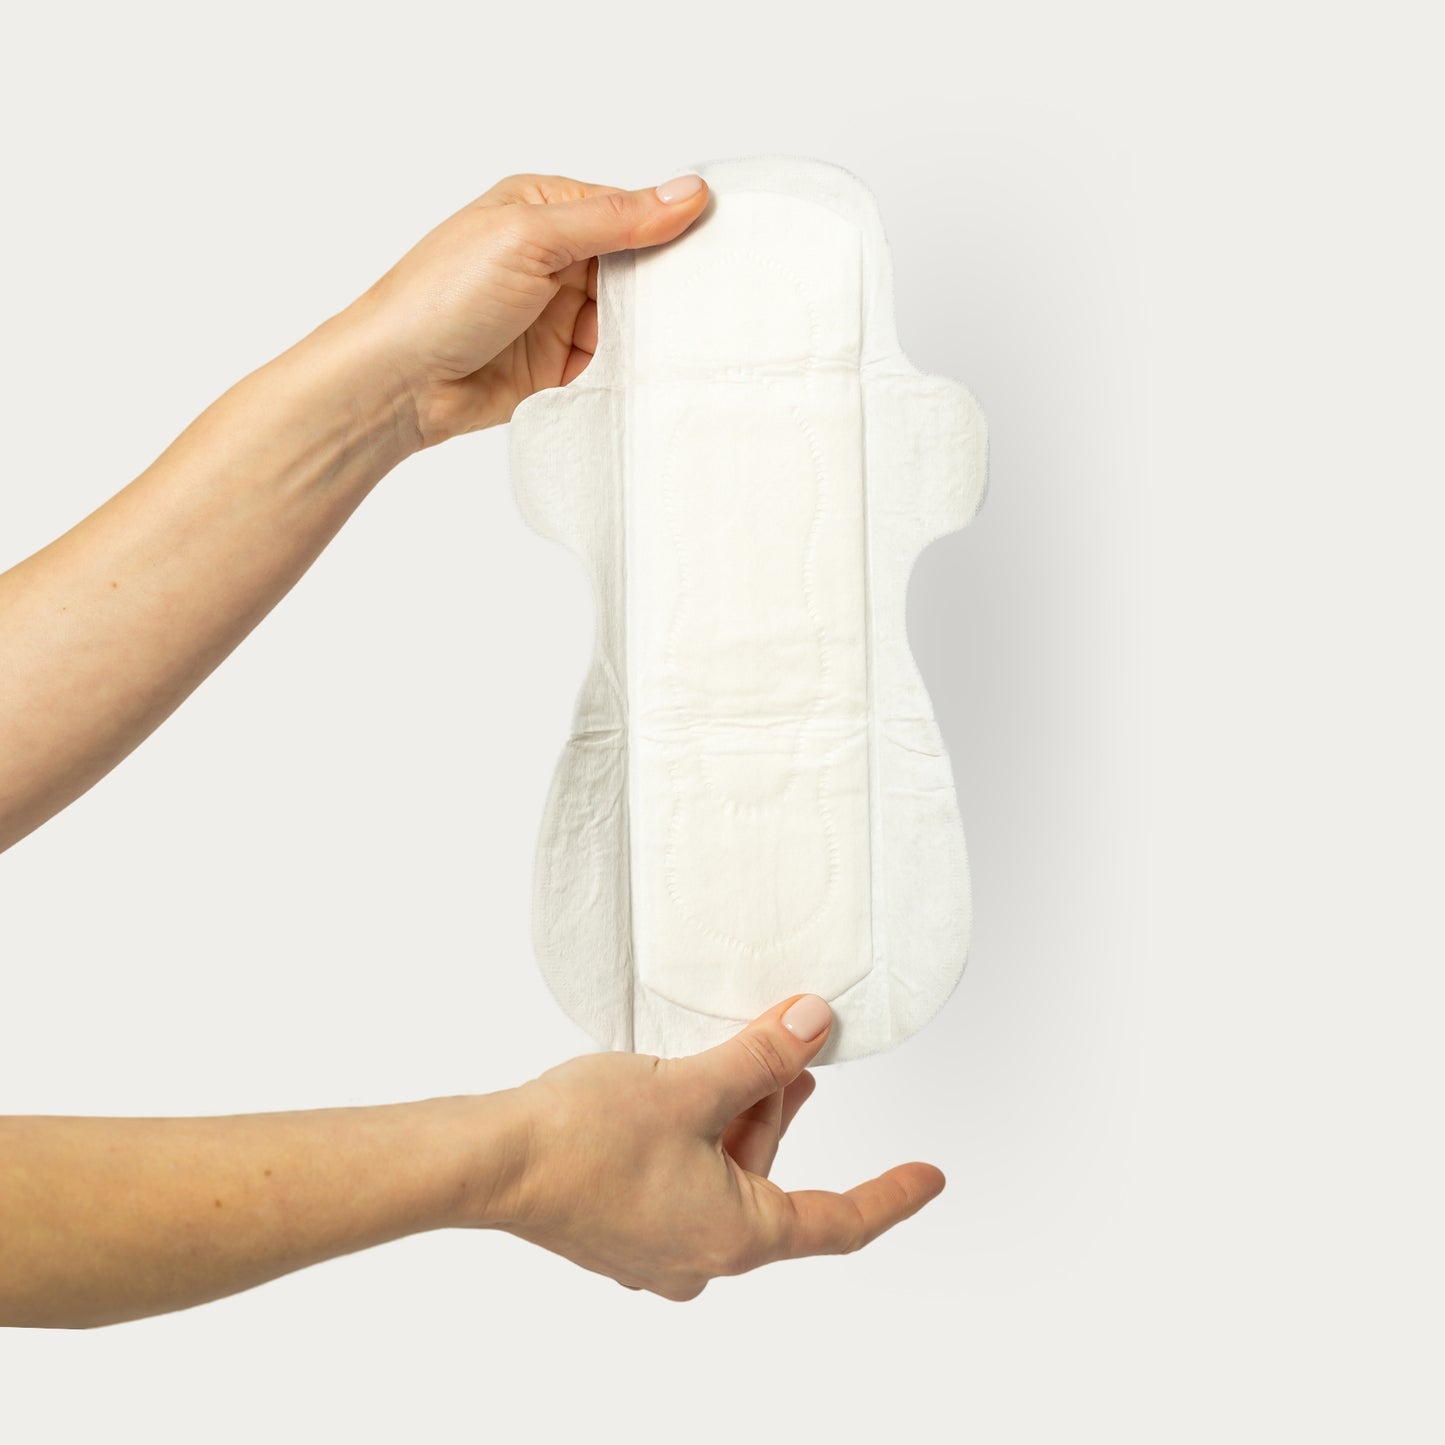 12-CT or 24-CT Organic Cotton Overnight Super Absorbency Menstrual Pads, 8-Ct Drawstring Packs